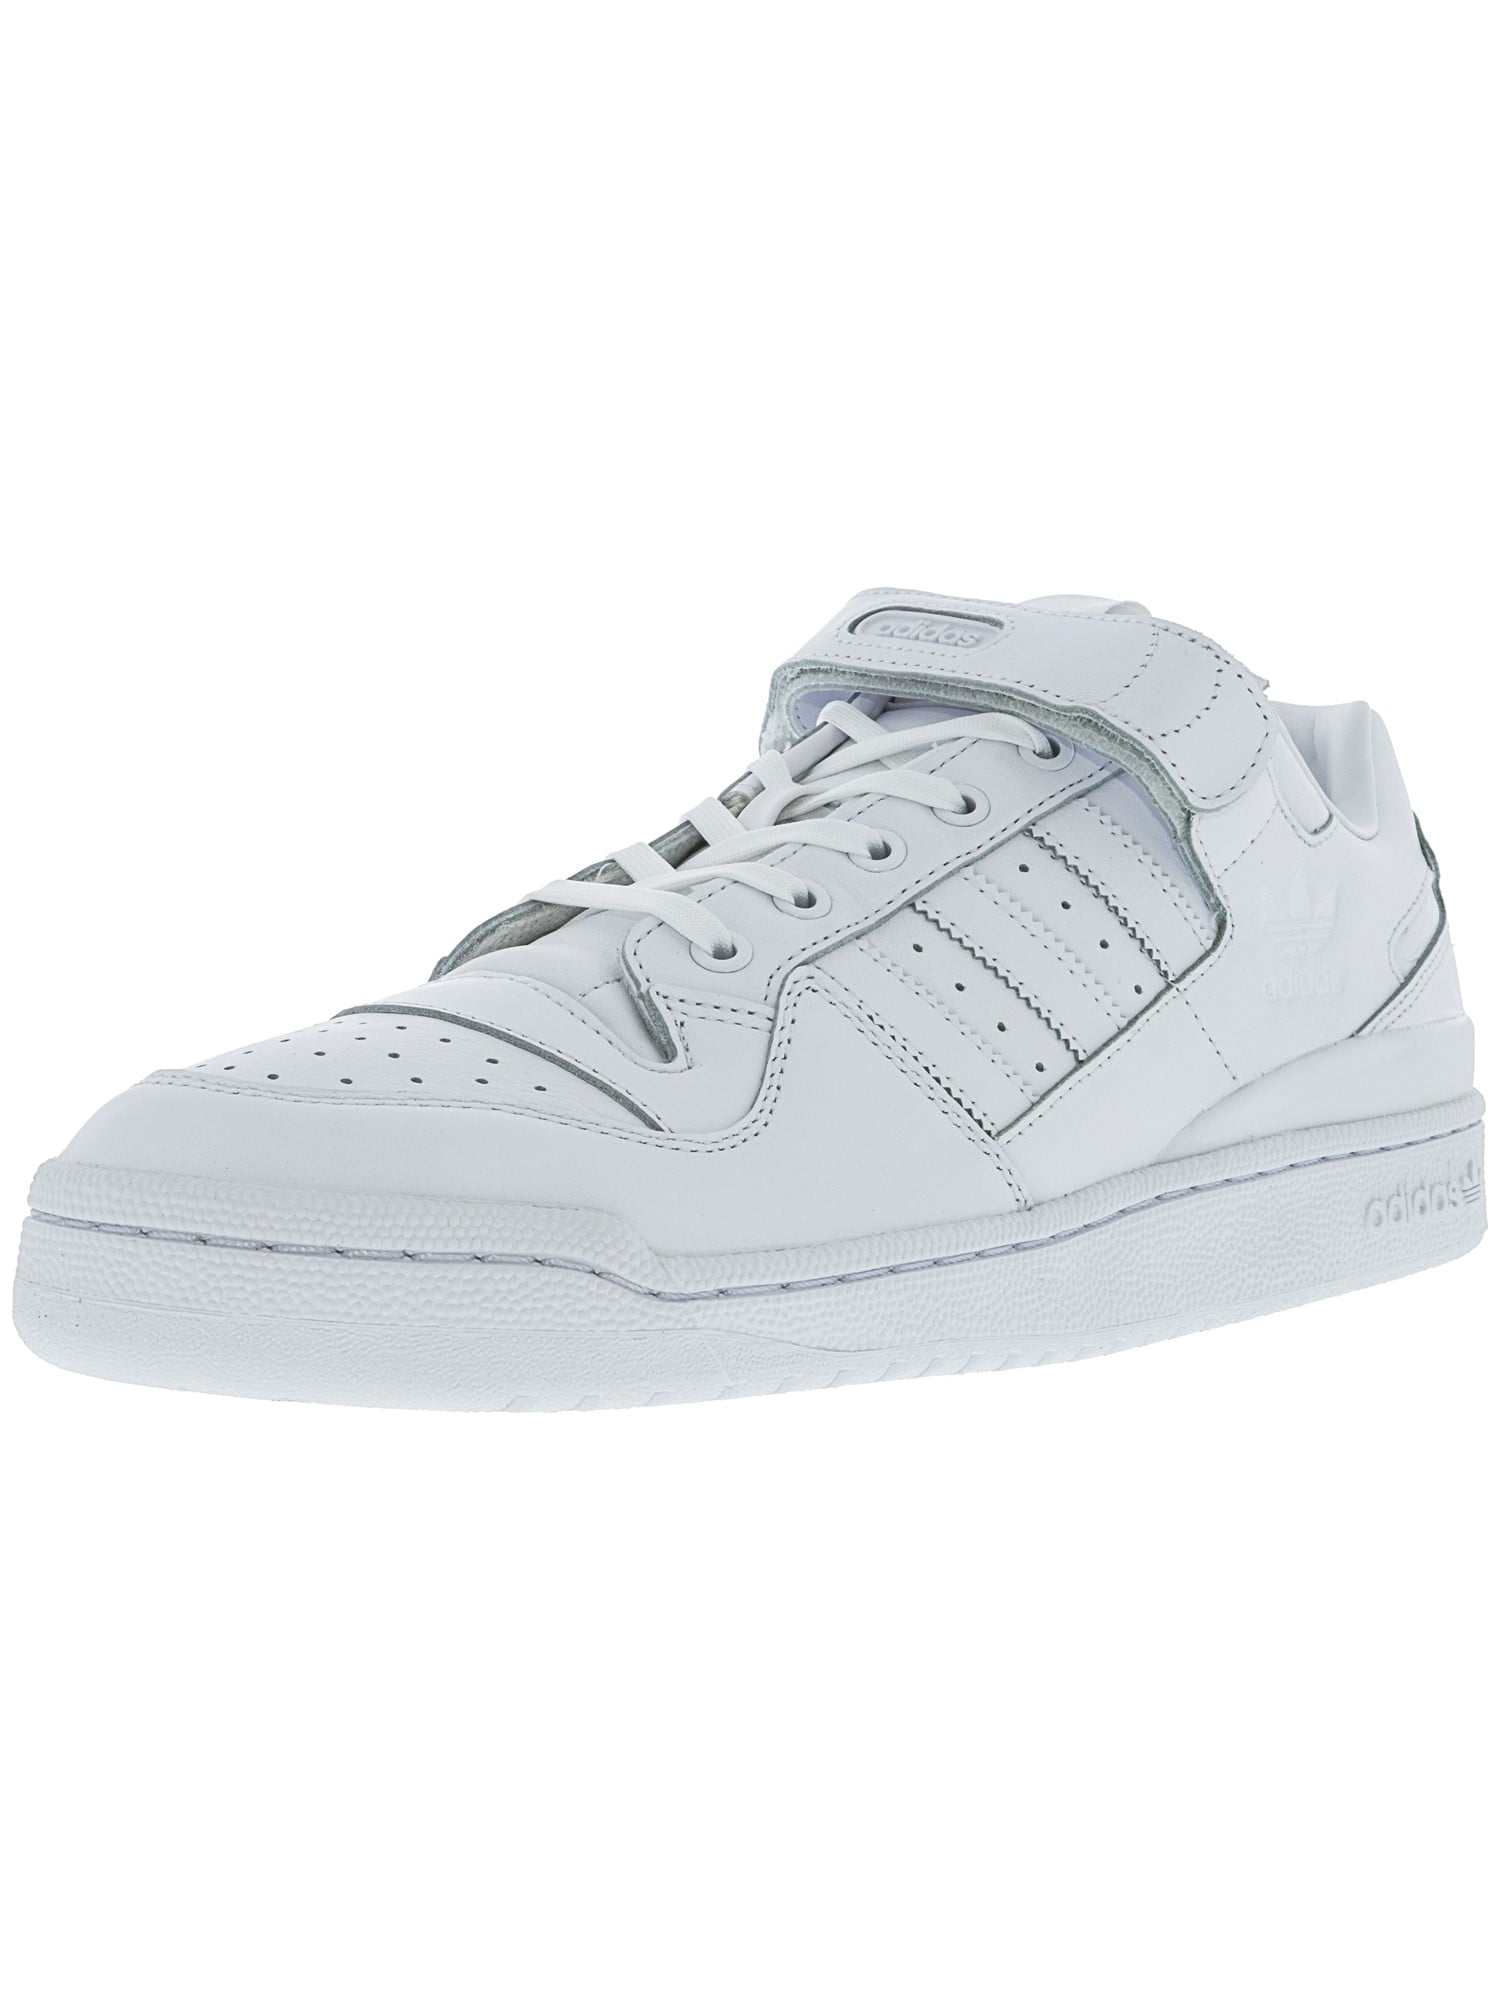 adidas white high ankle sneakers